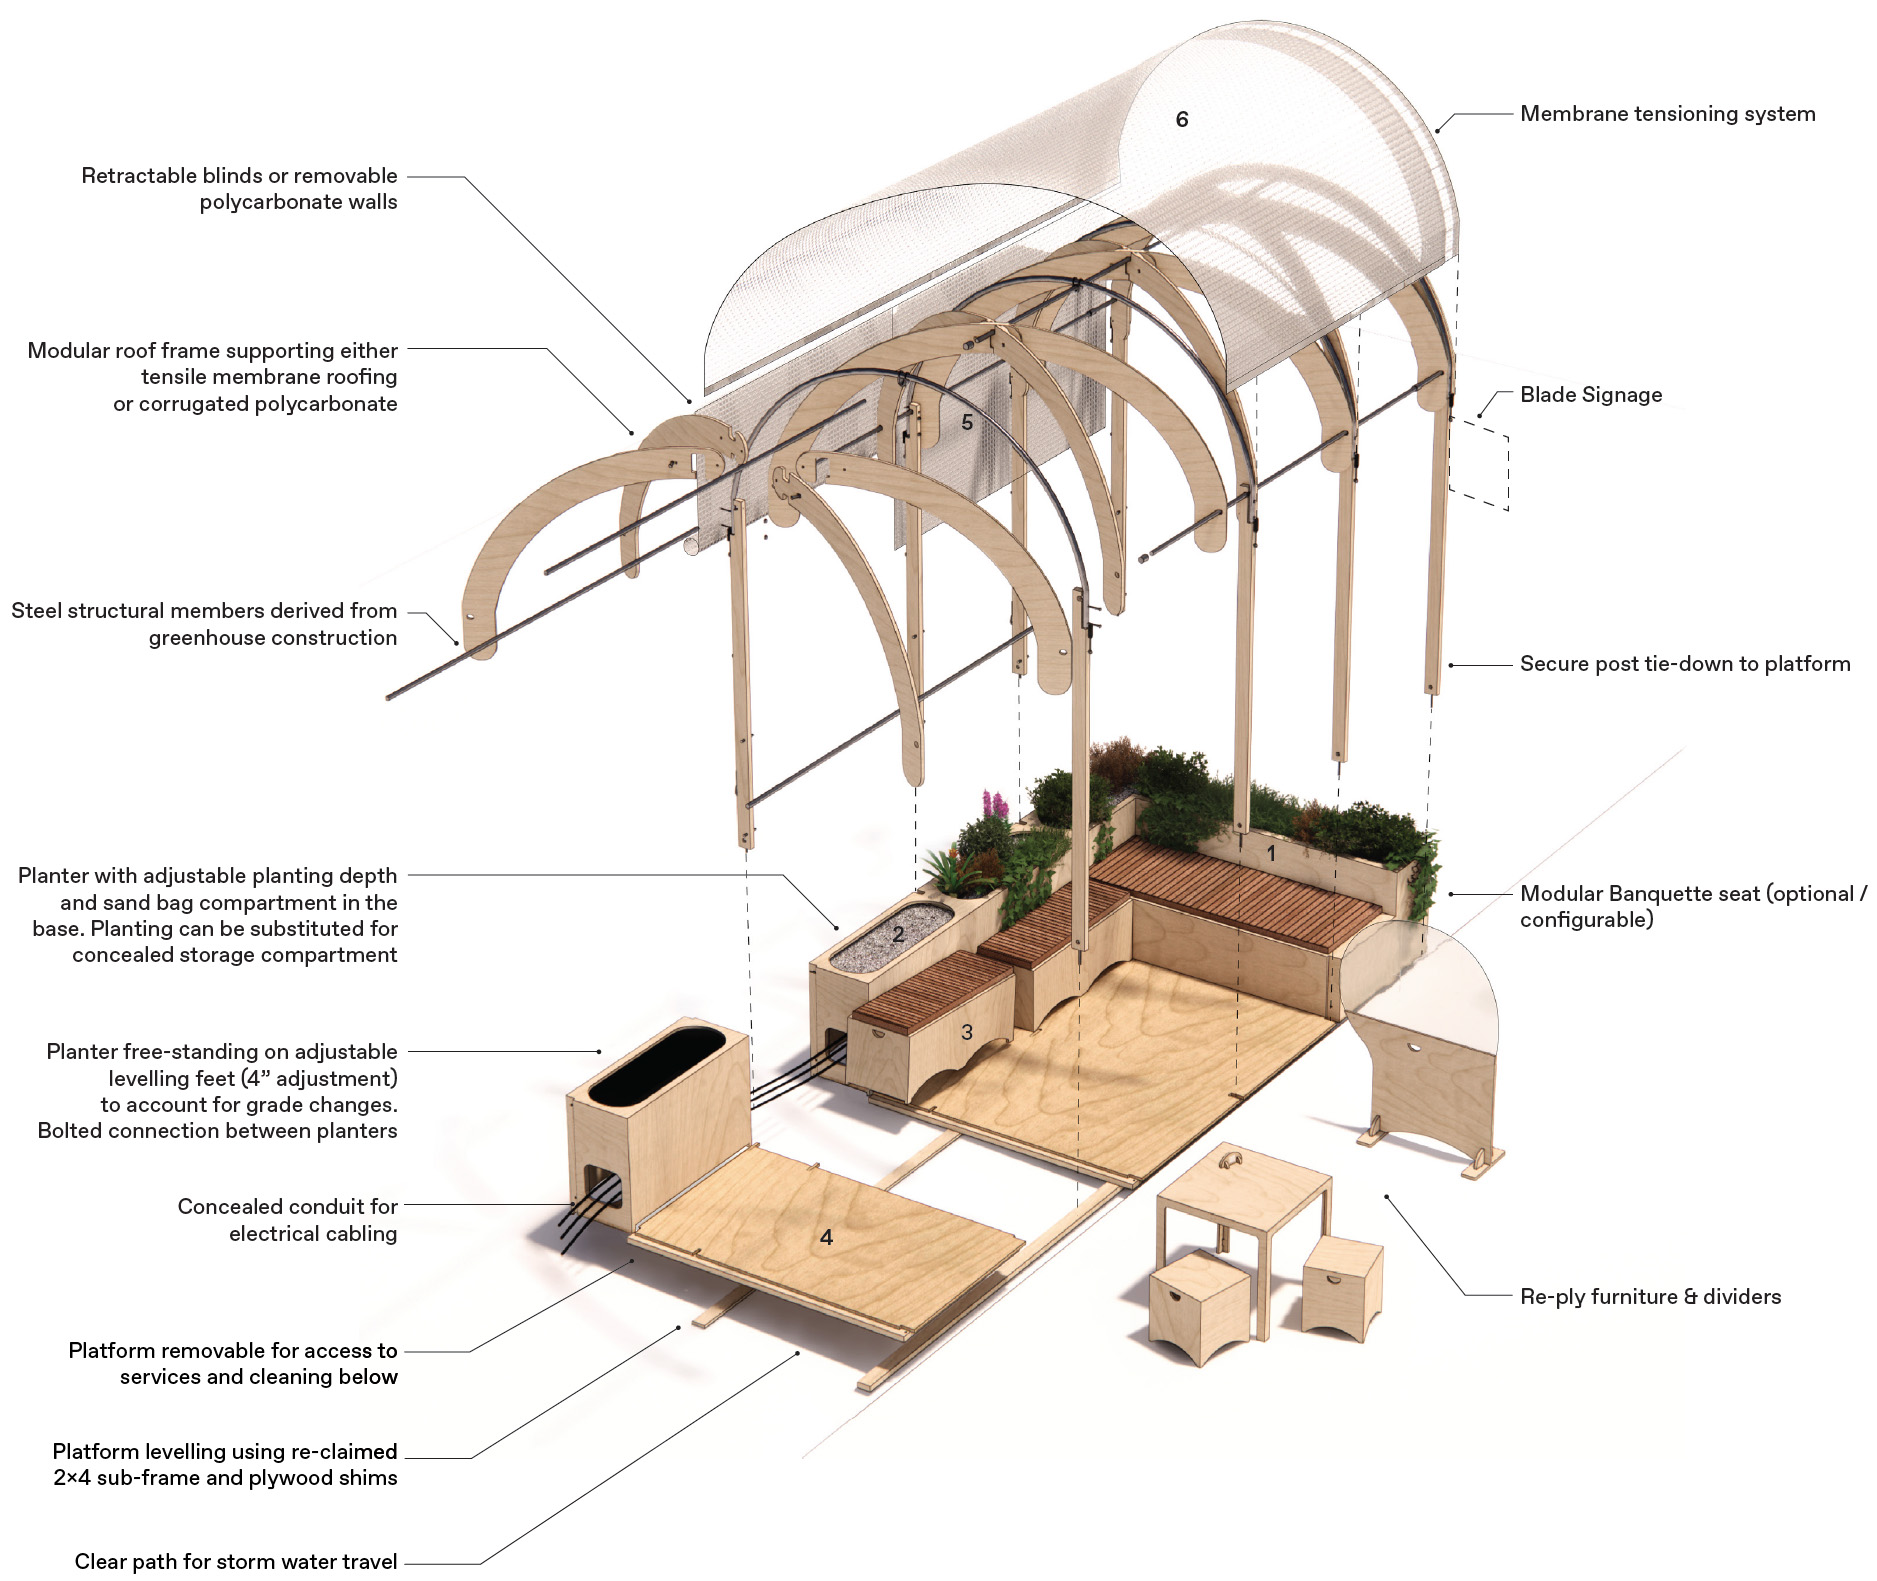 Rendered diagram showing the pieces and components making up the Re-Ply structure and how they come together. The structure is made from mostly plywood.